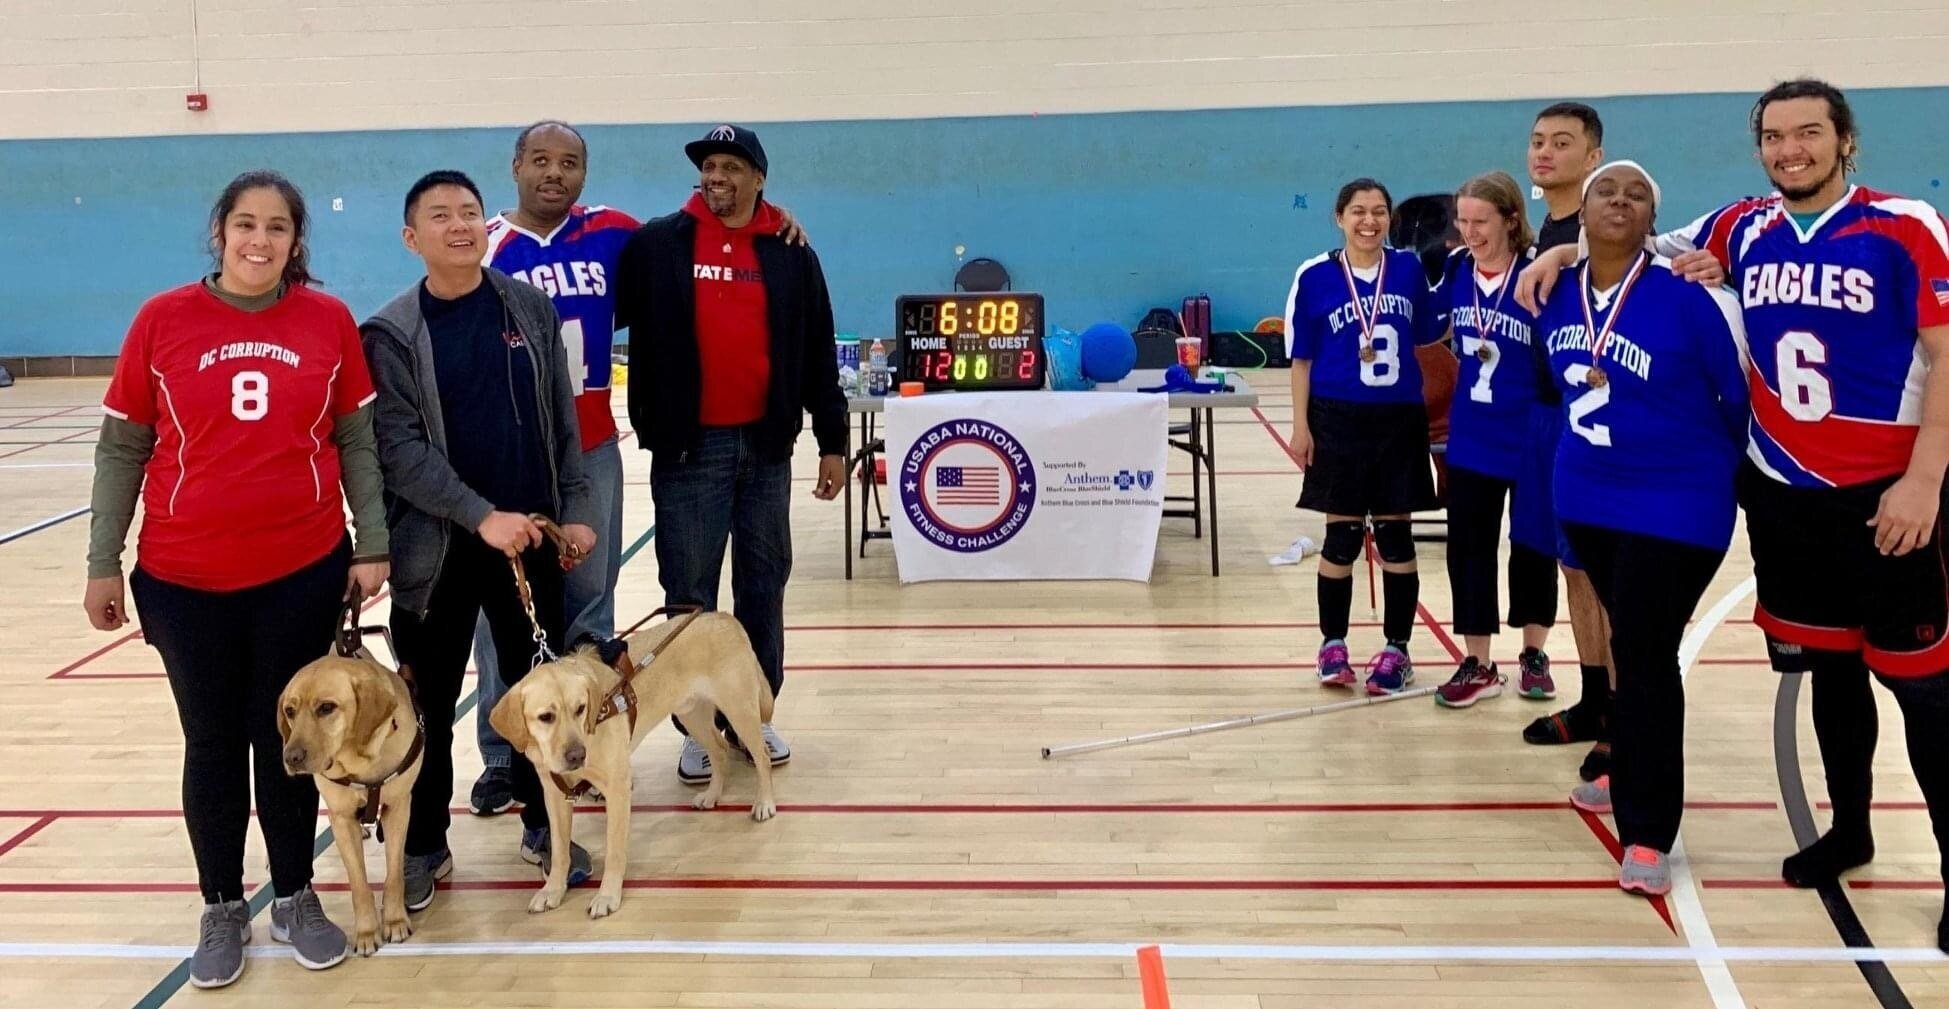 Photo taken after WMABA tournament, spring 2019. Several players in the photo, most wearing team jerseys. Some have medals on their chests. Behind them is the USABA National Fitness Challenge banner.